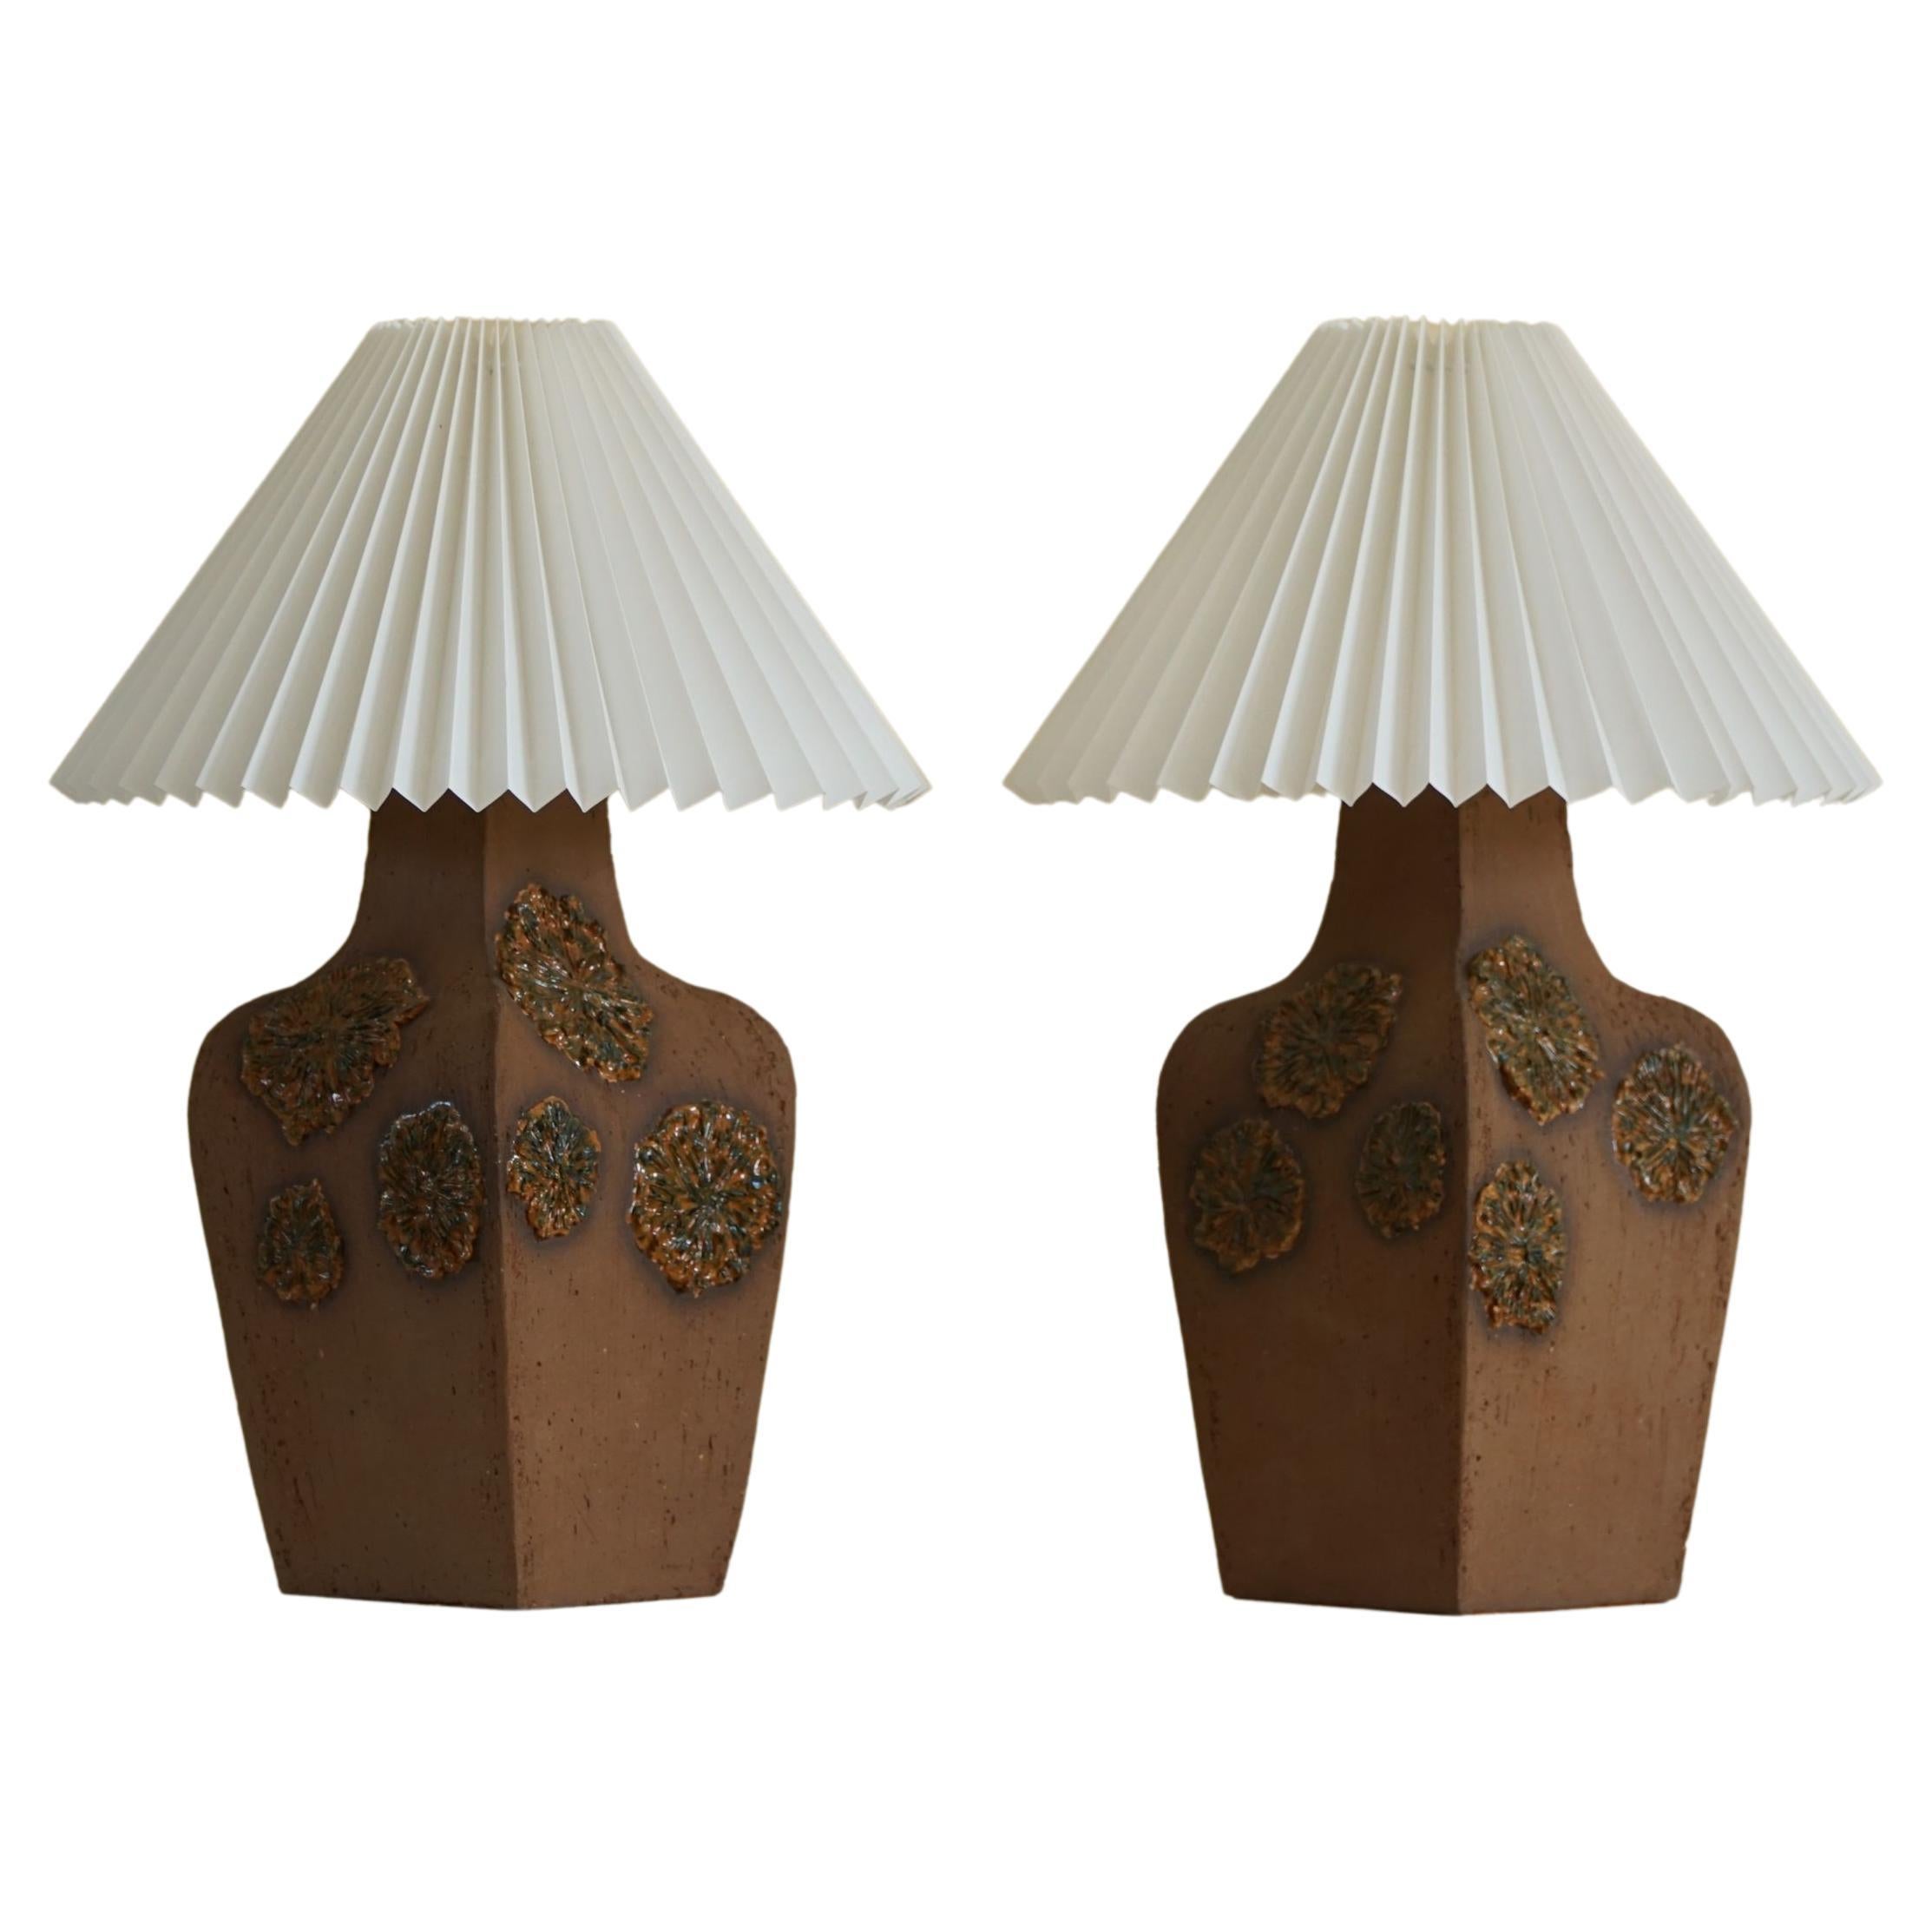 Pair of Danish Mid-Century Modern Brutalist Ceramic Table Lamps, Made in 1970s